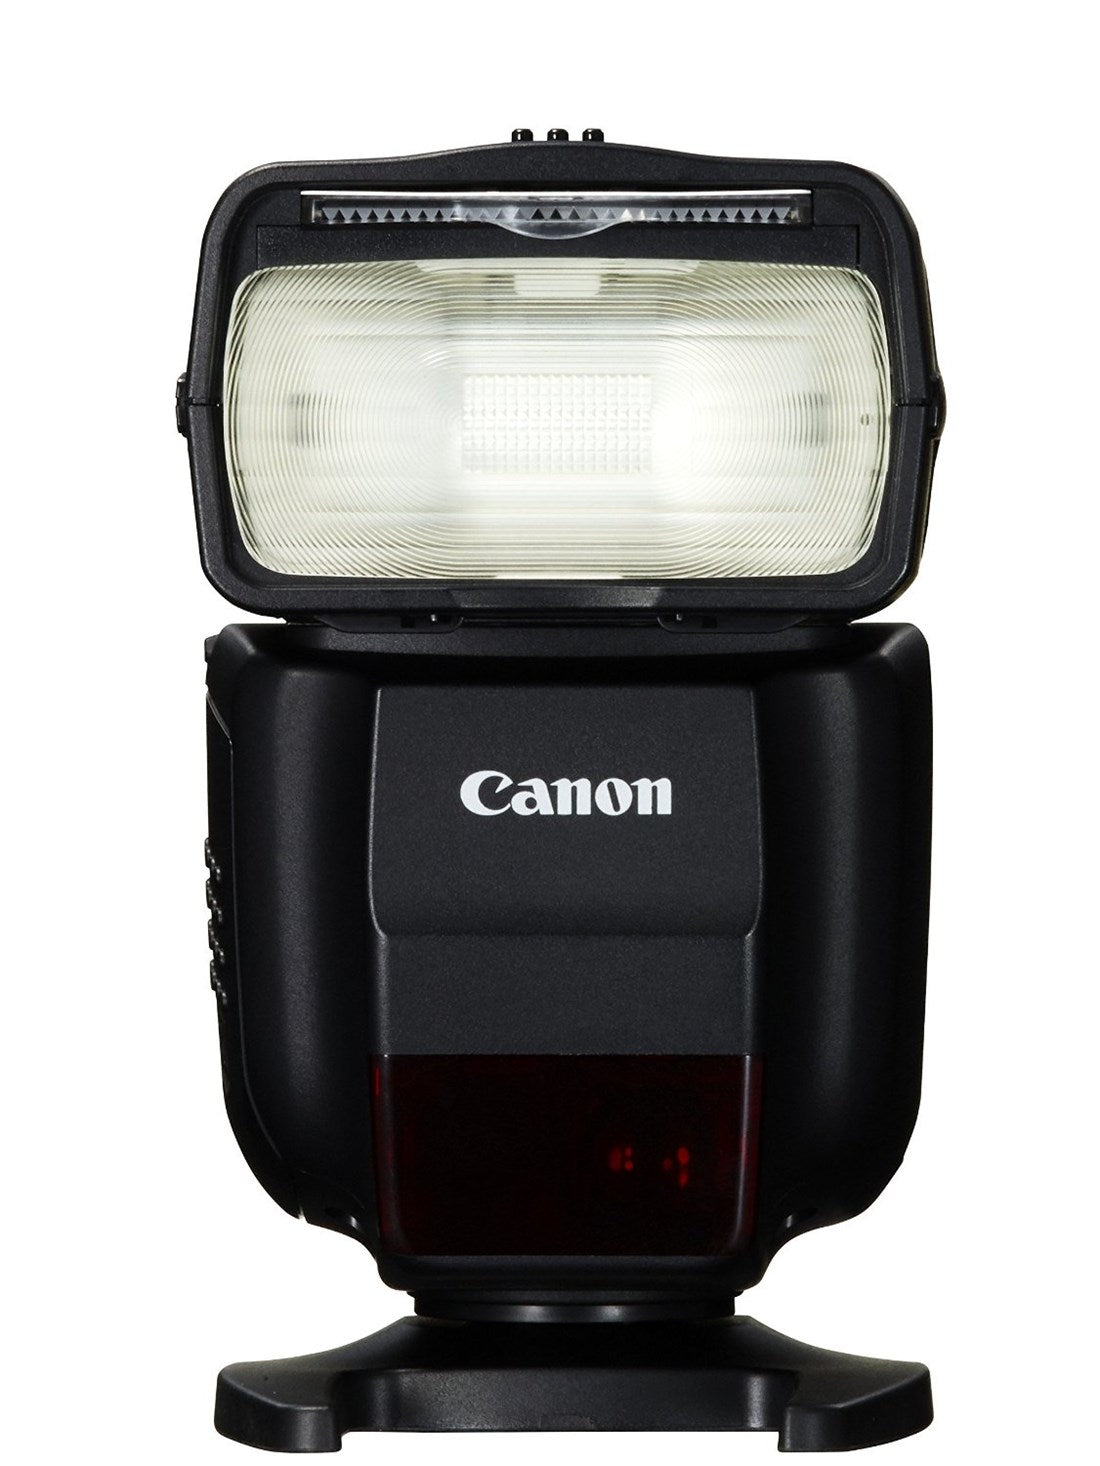 Product Image of Clearance Canon Speedlite 430EX III-RT Flash (CLEARANCE2300)